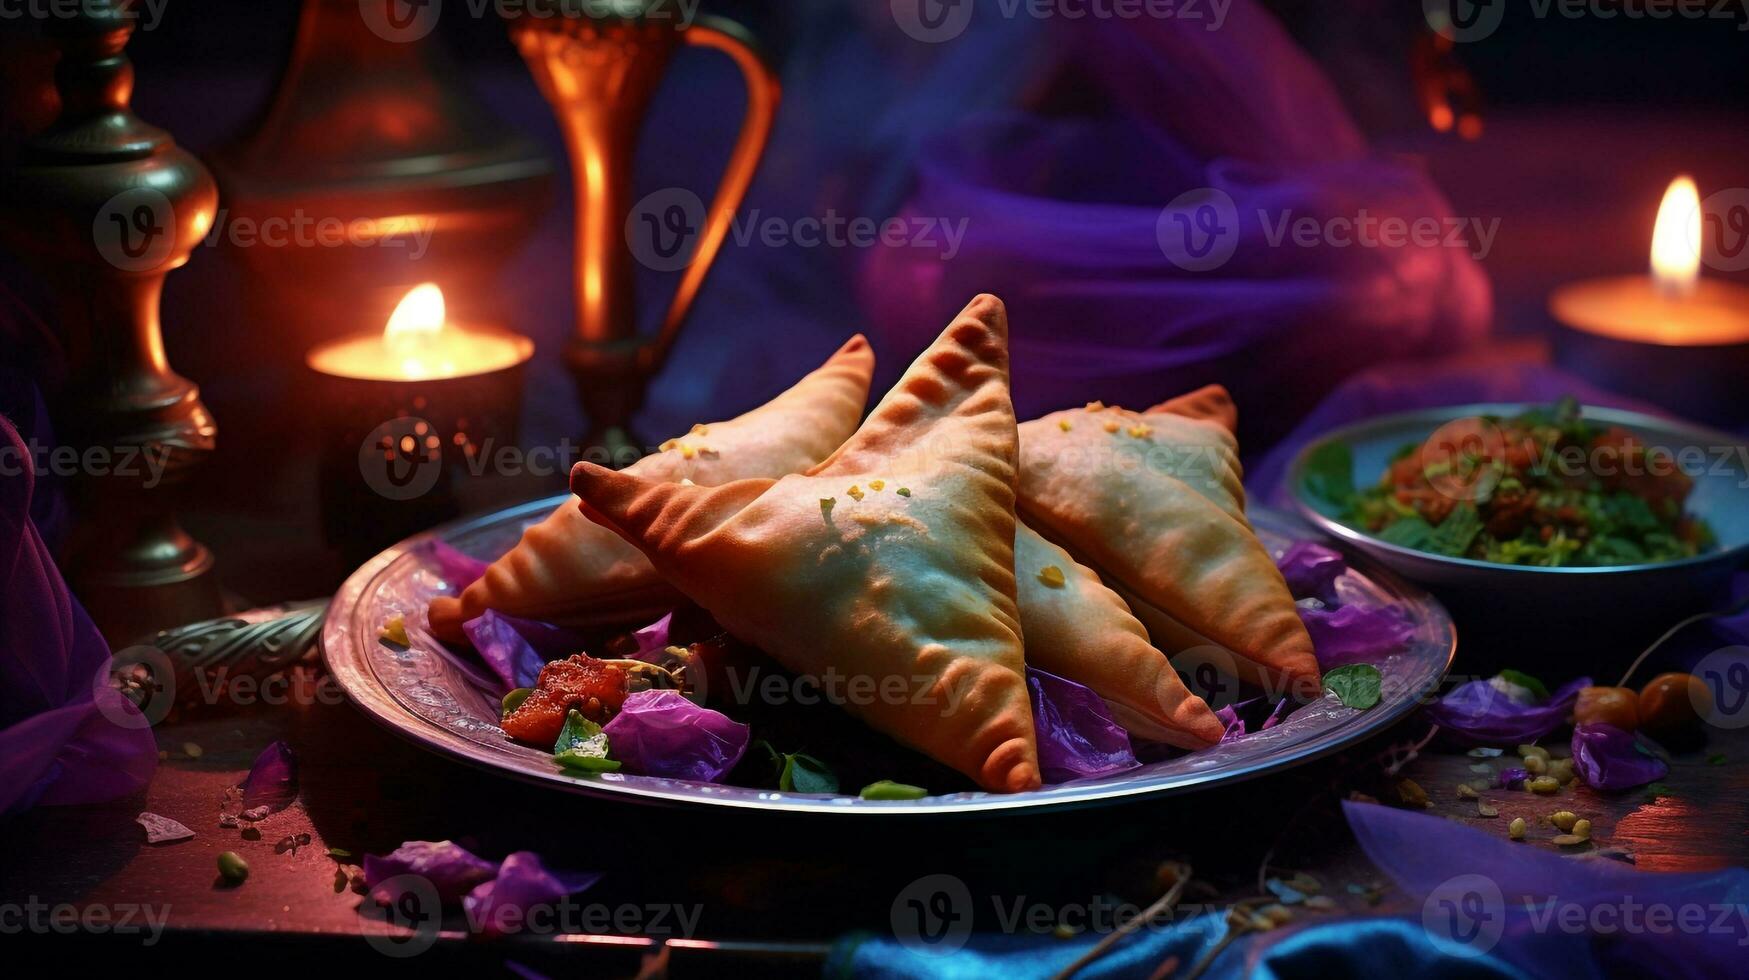 Samosa curry stuffed with methi, diwali stock images, realistic stock photos